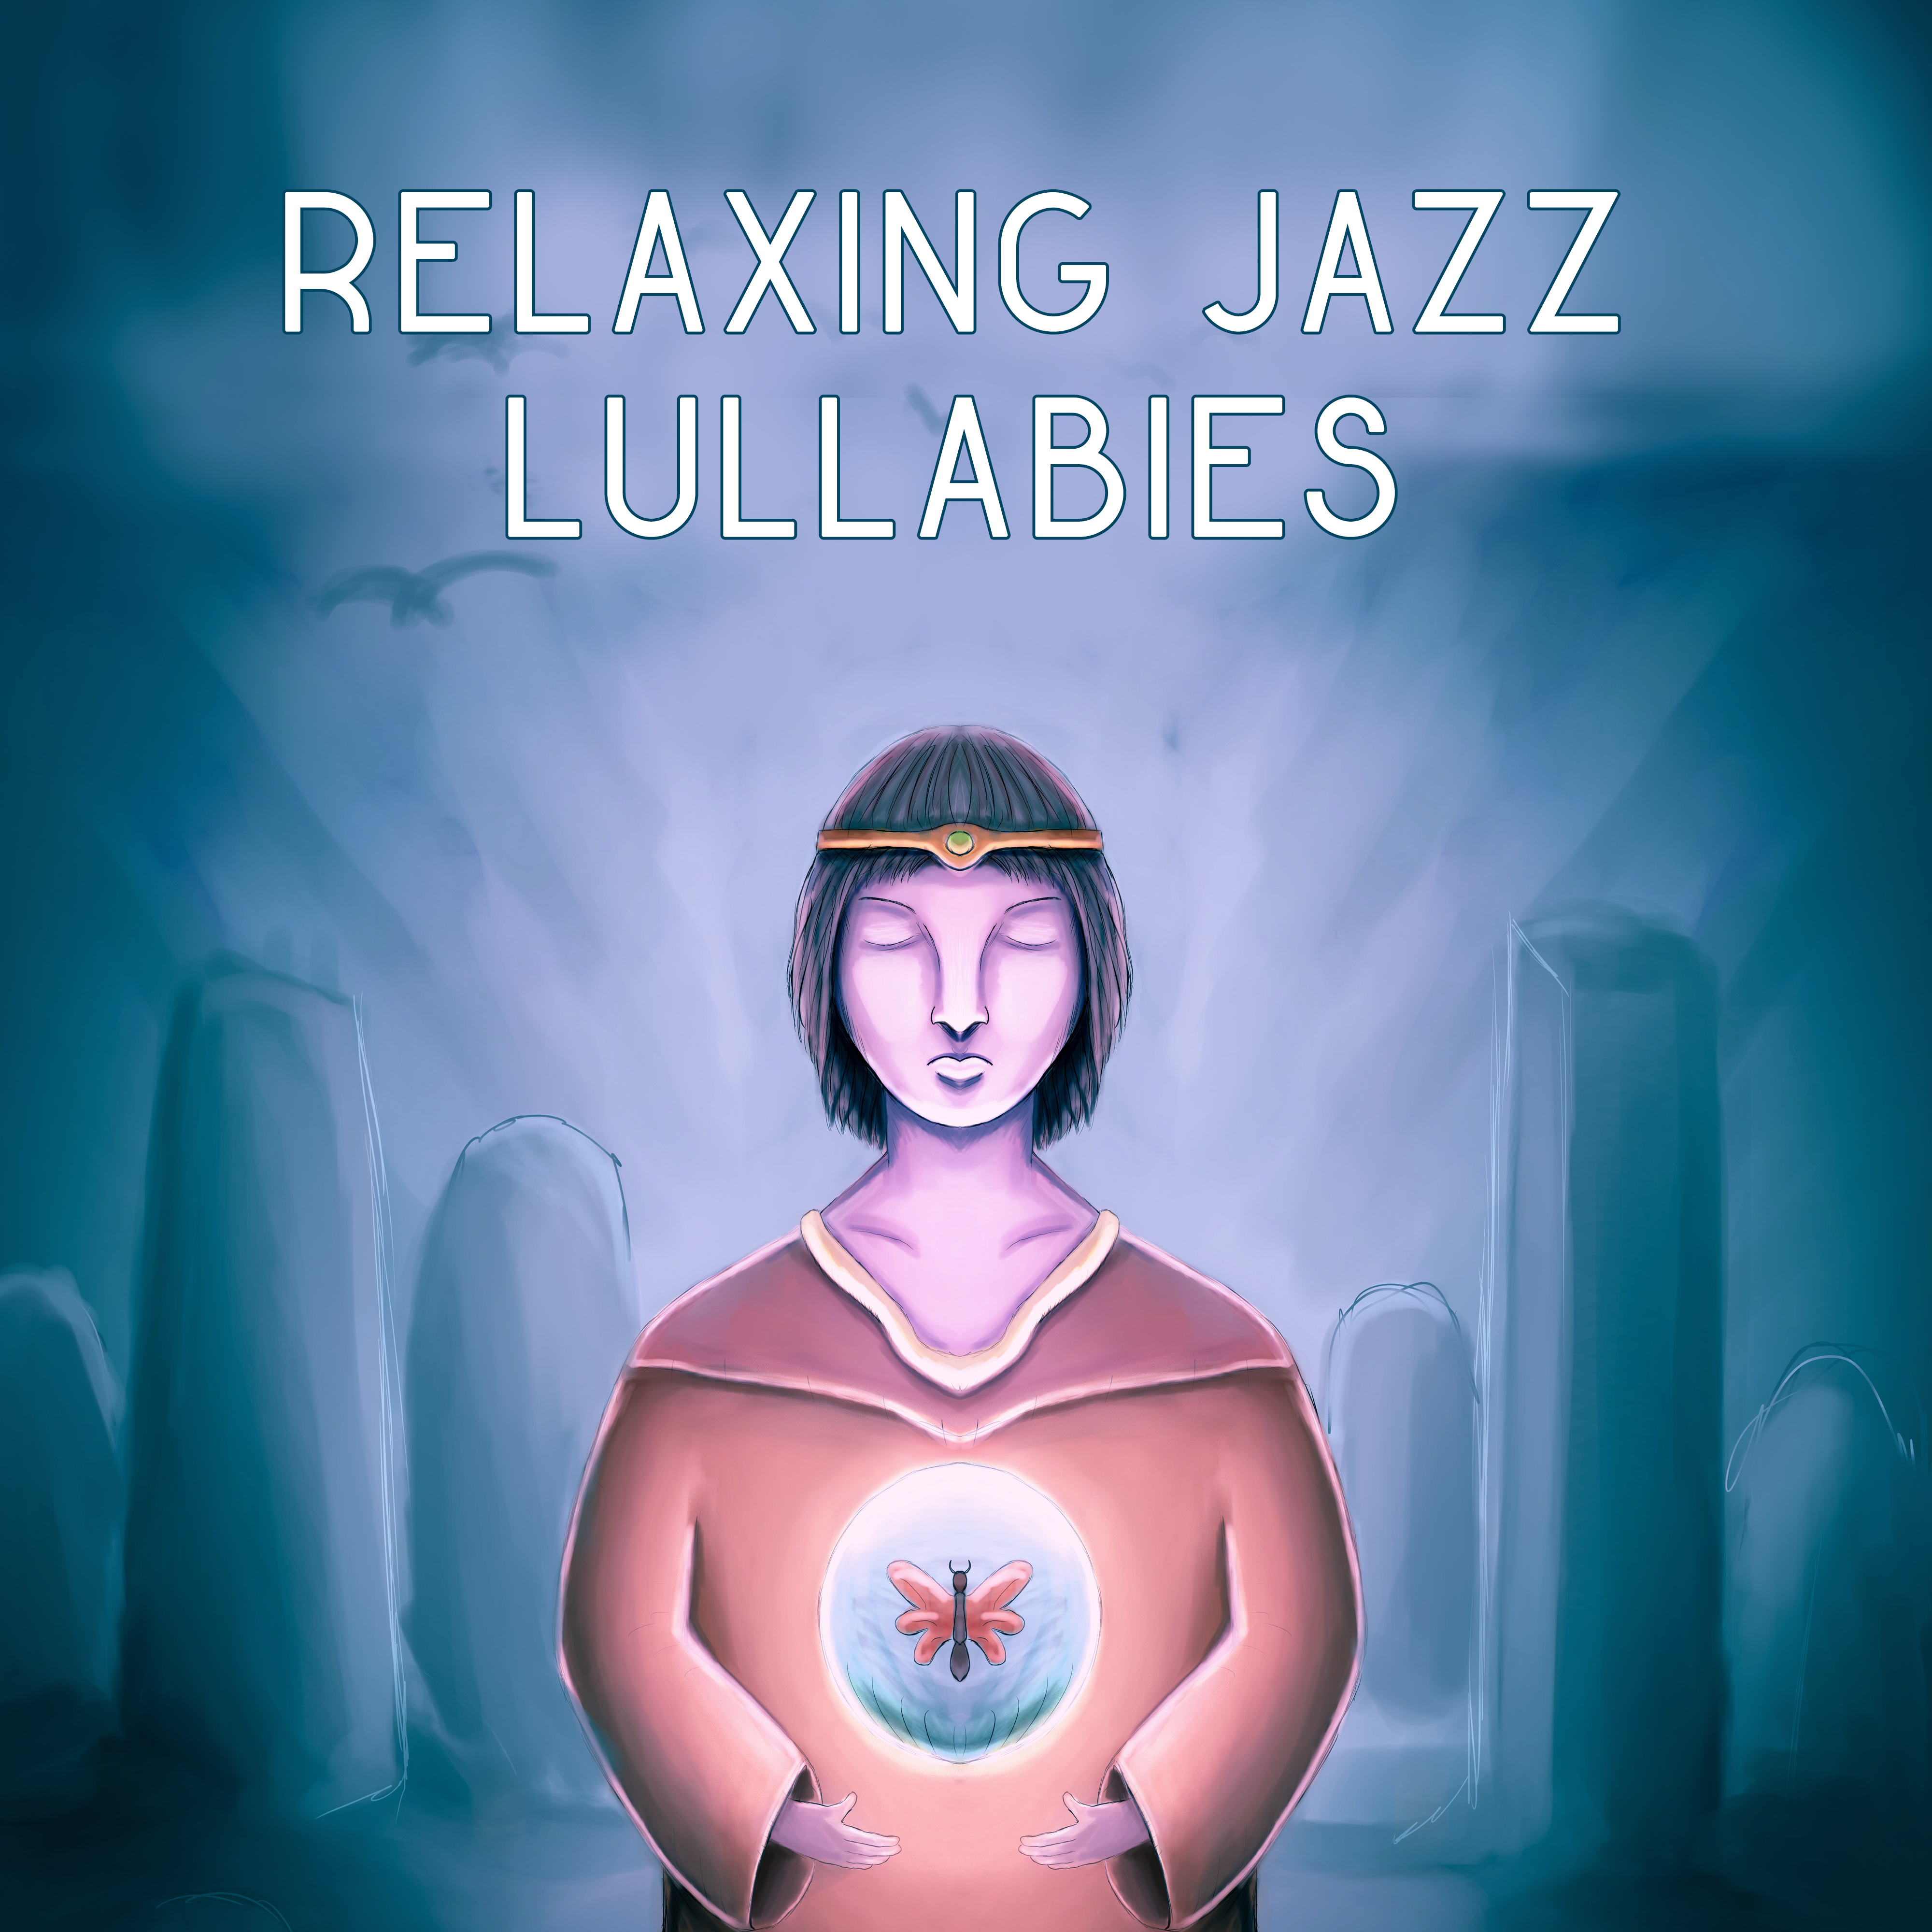 Relaxing Jazz Lullabies – Mellow Jazz, Relaxed Jazz, Peaceful Piano Melodies, Ambient Instrumental Music